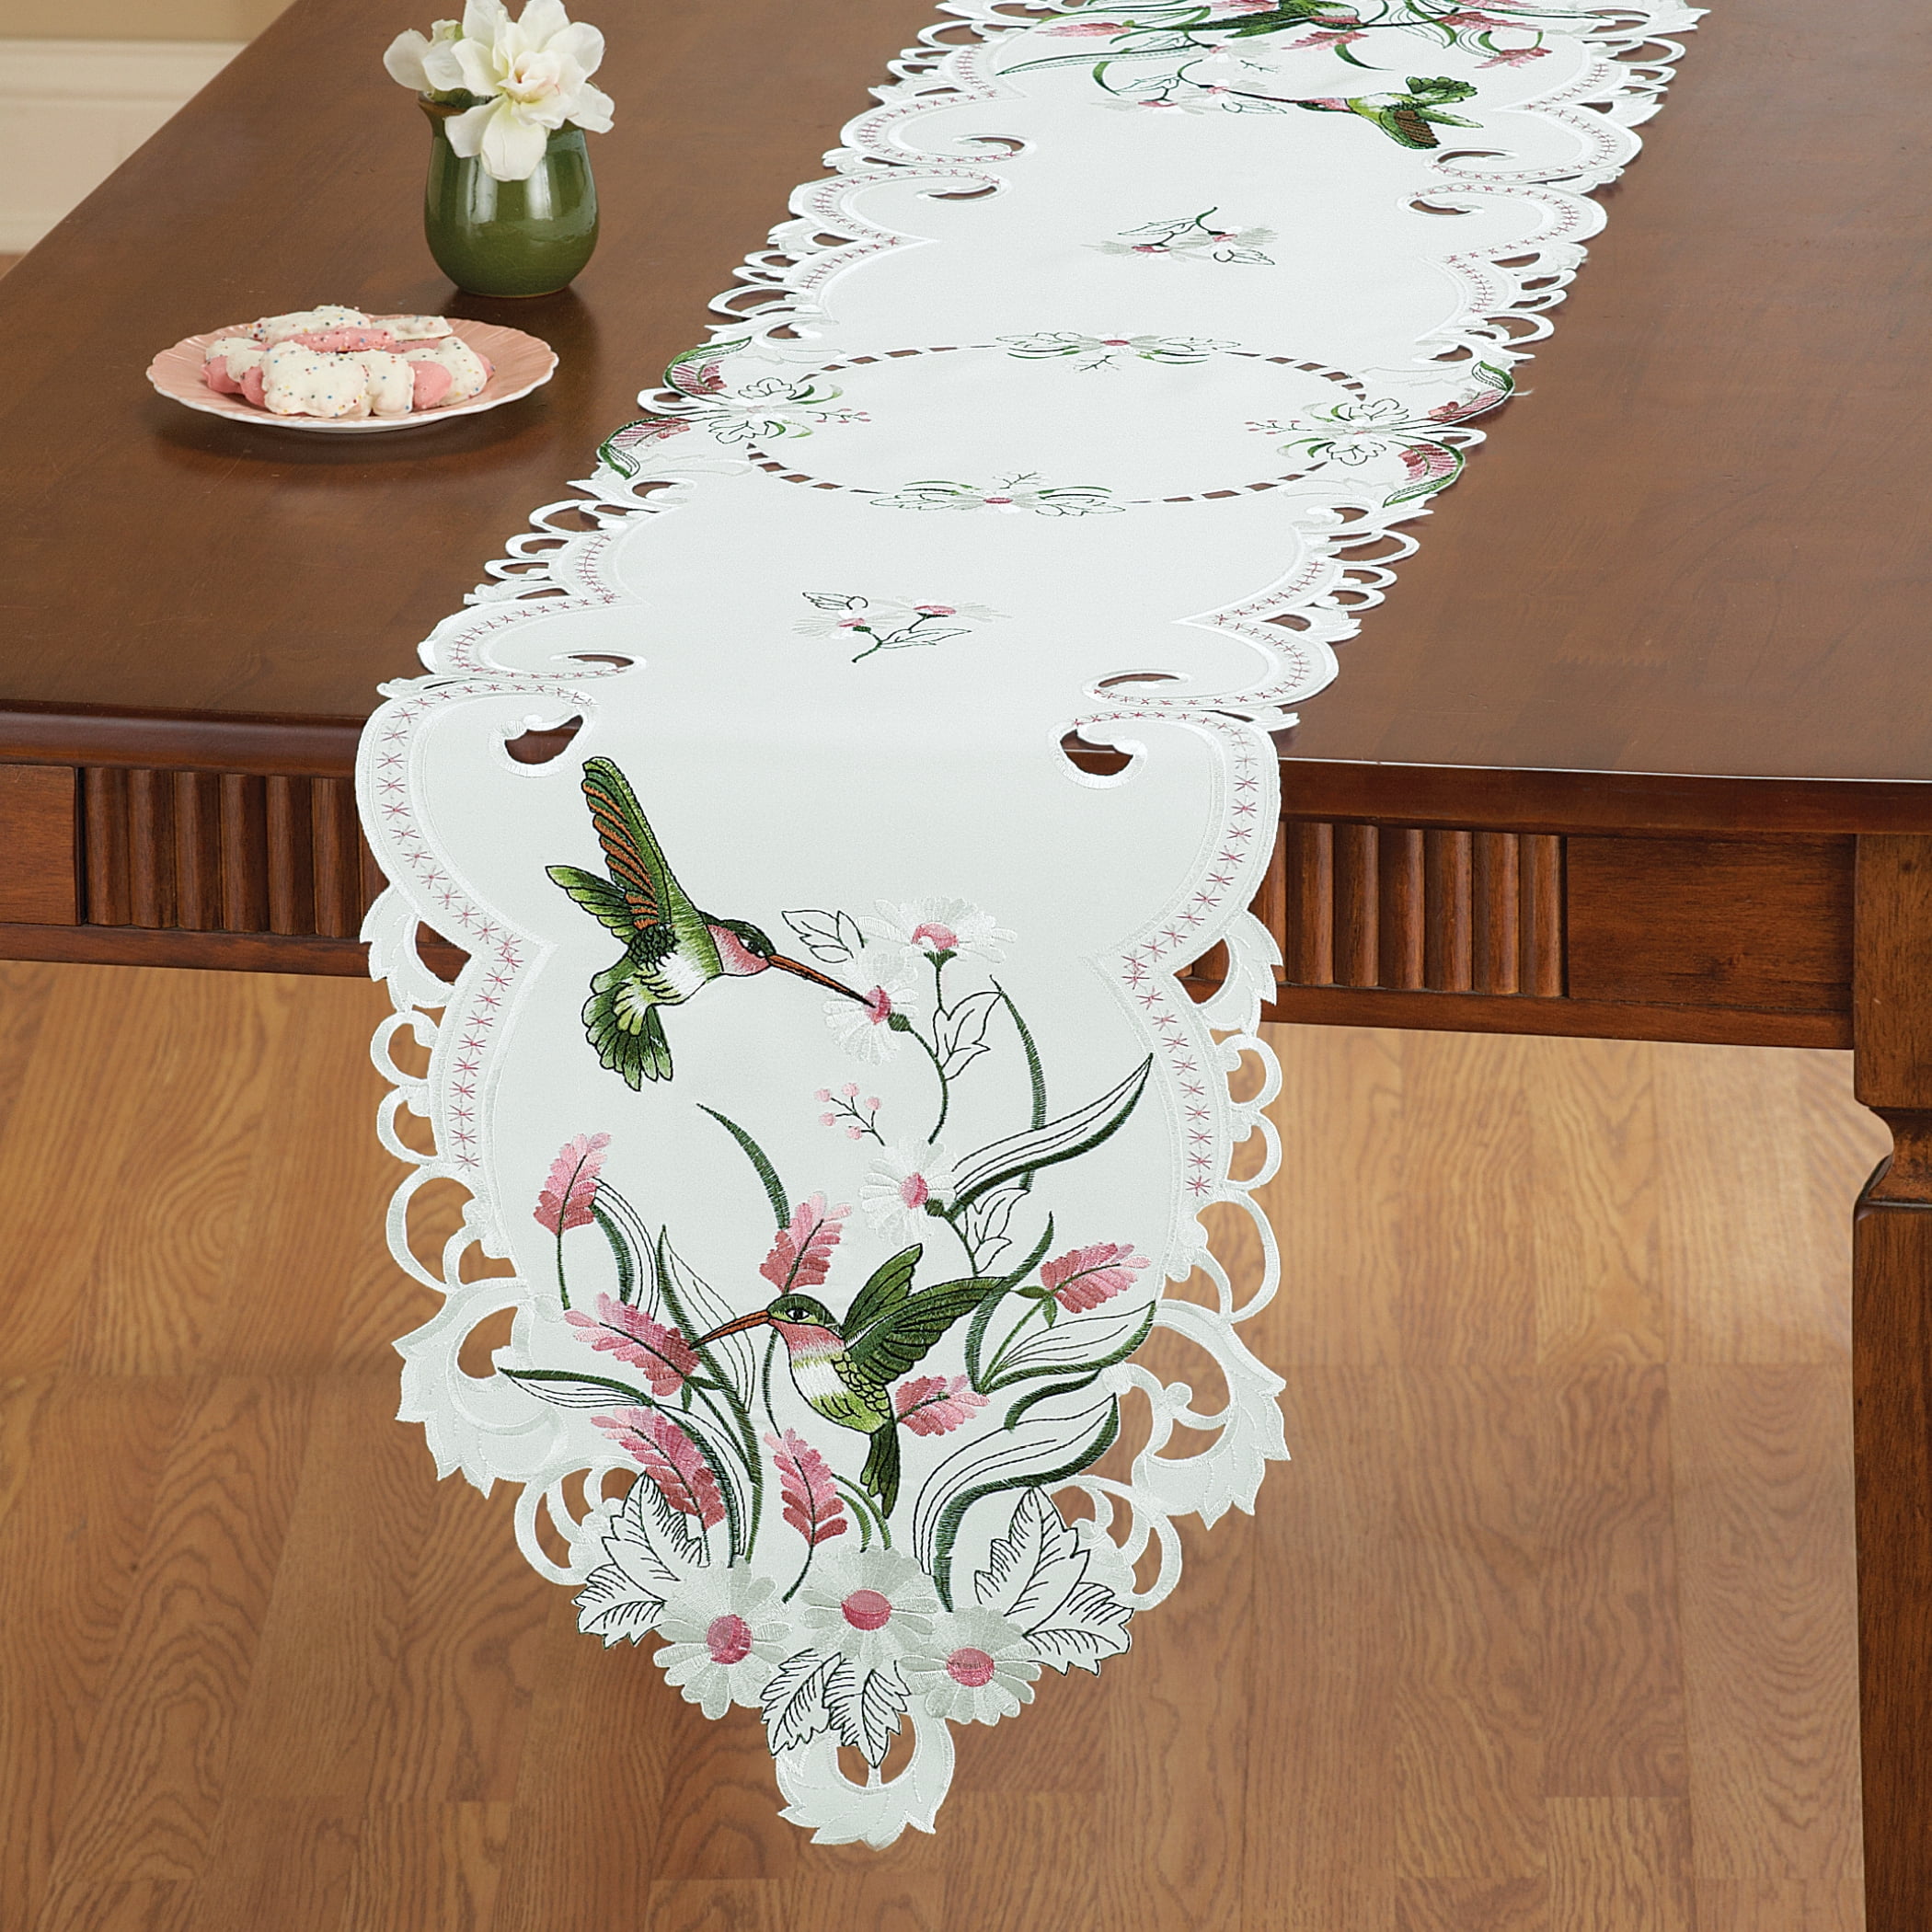 Butterfly Table runner Doily Tablecloth Ecru with coloured Flower Embroidery 